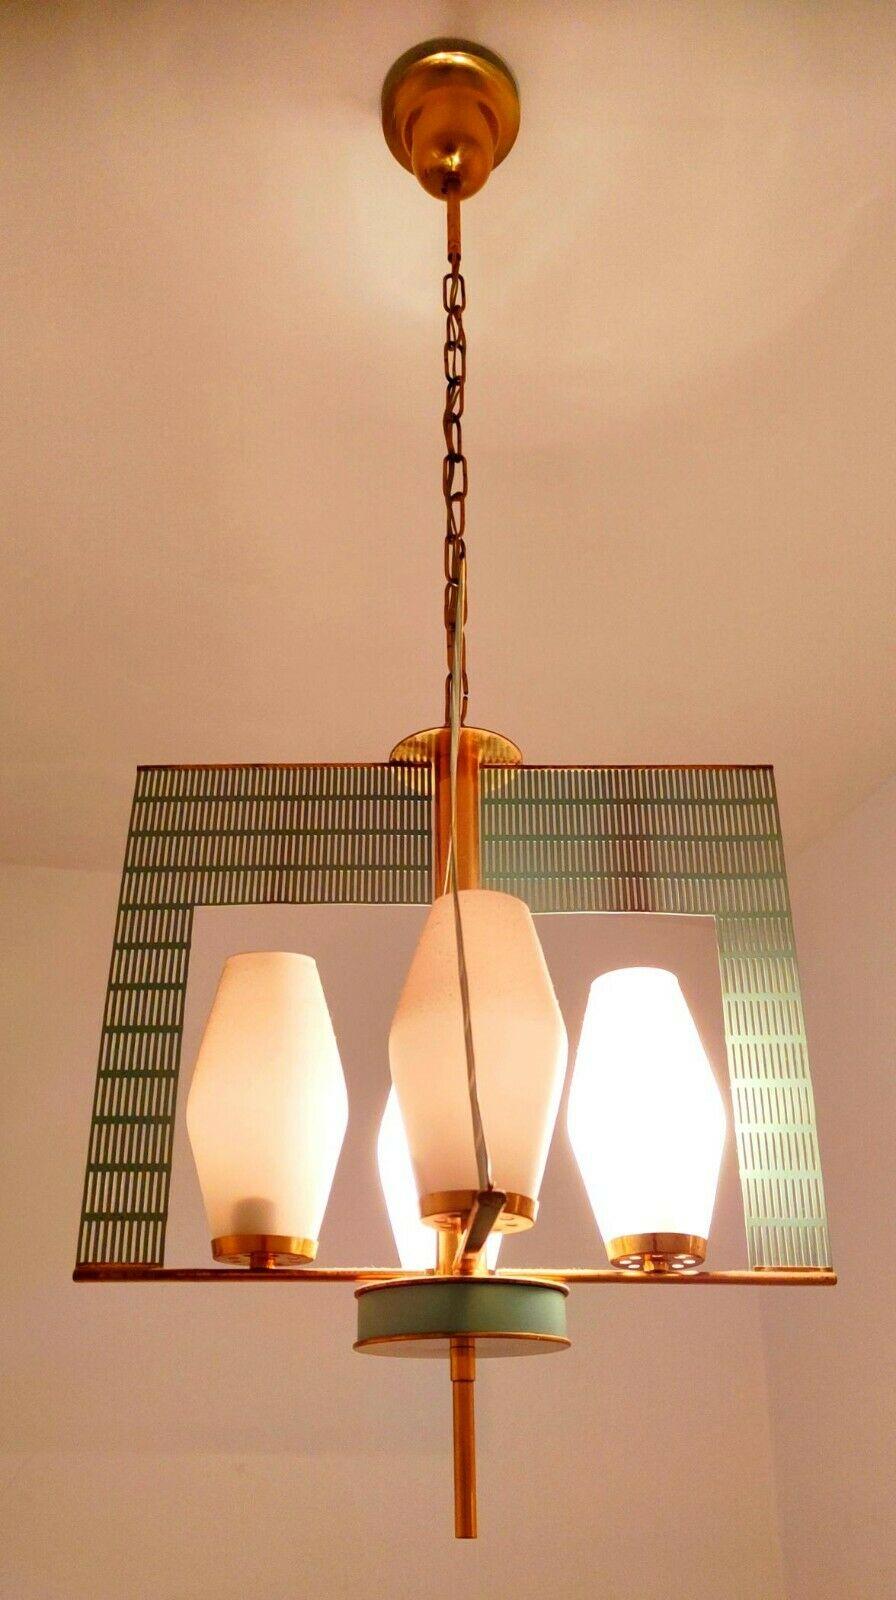 Rare original 60s chandelier, design mathieu mategot, made of sage green perforated sheet metal on a brass structure with four lights and as many opalines in white murano glass

It measures about 1 meter in height, about 40 cm in width and just